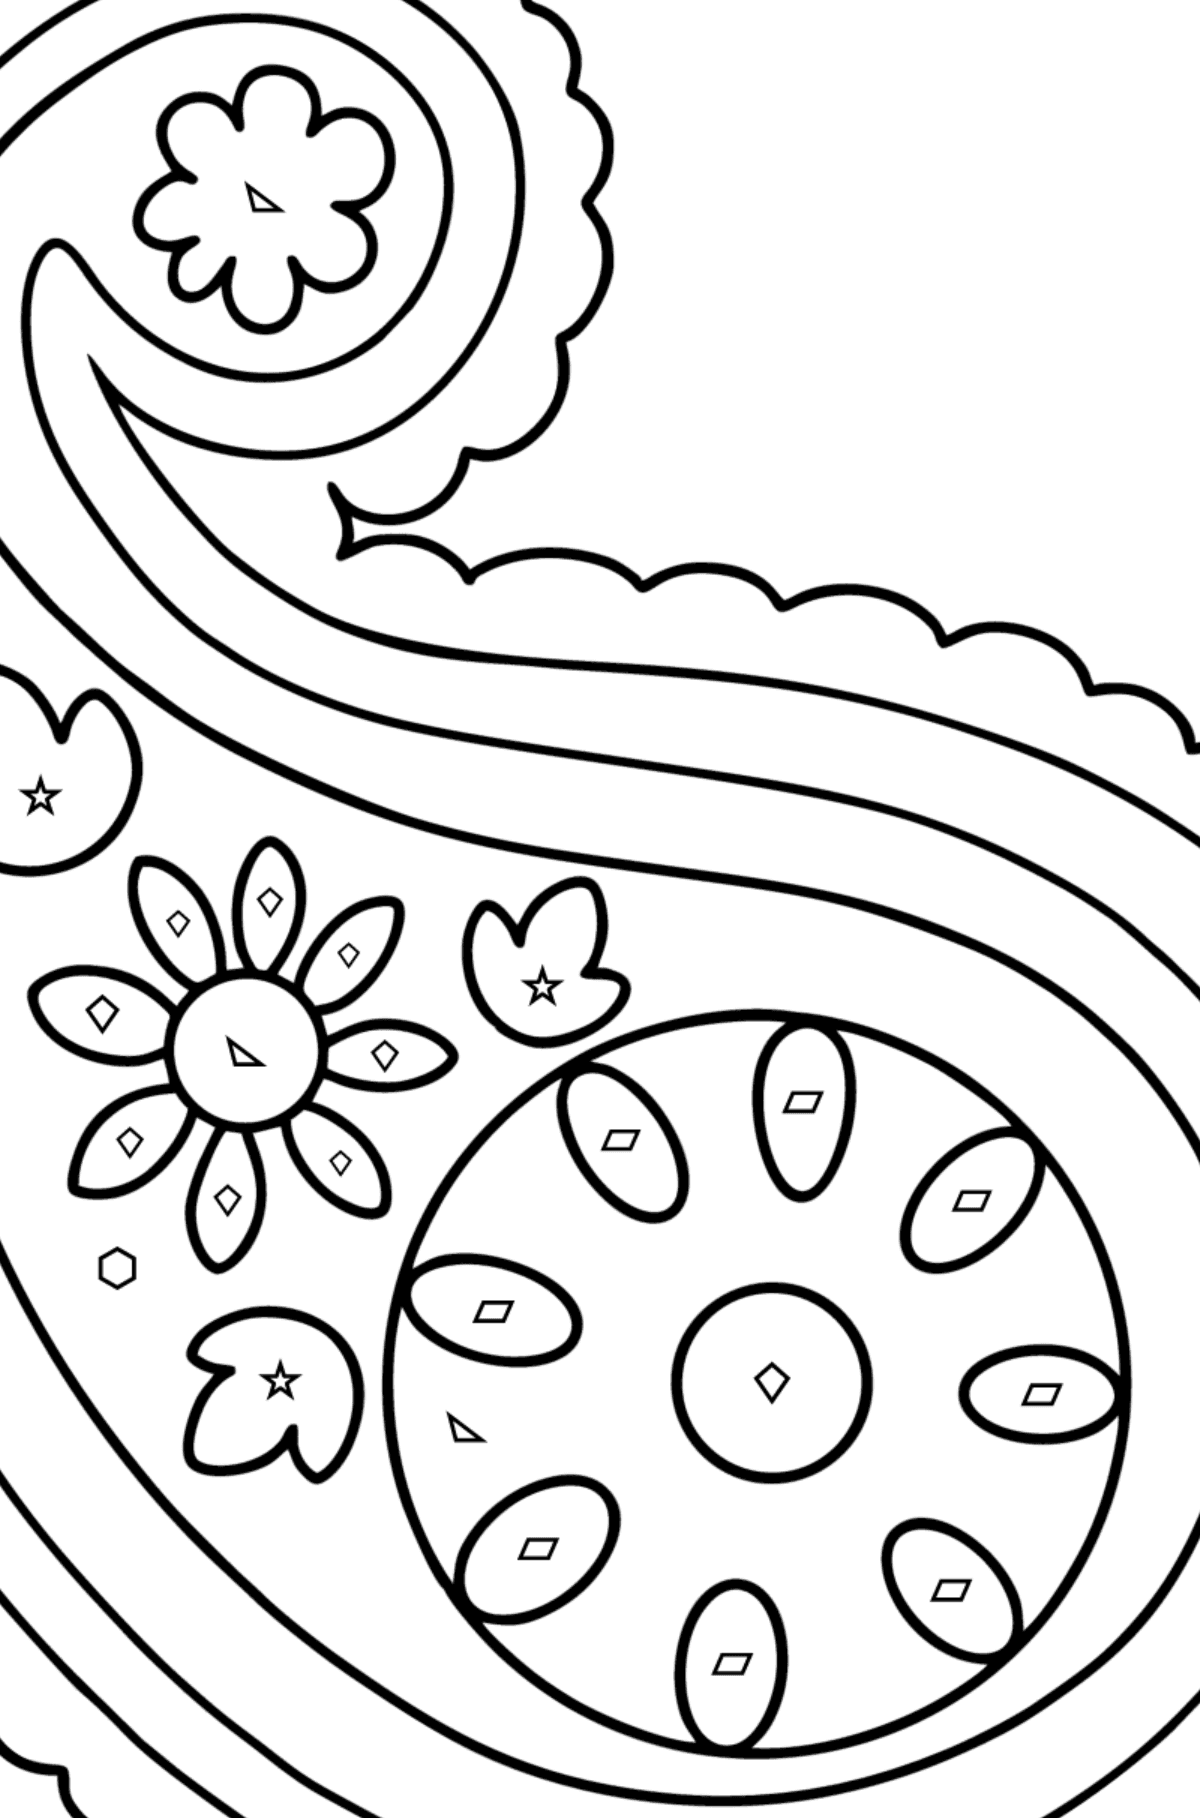 Cute Paisley coloring page - Coloring by Geometric Shapes for Kids